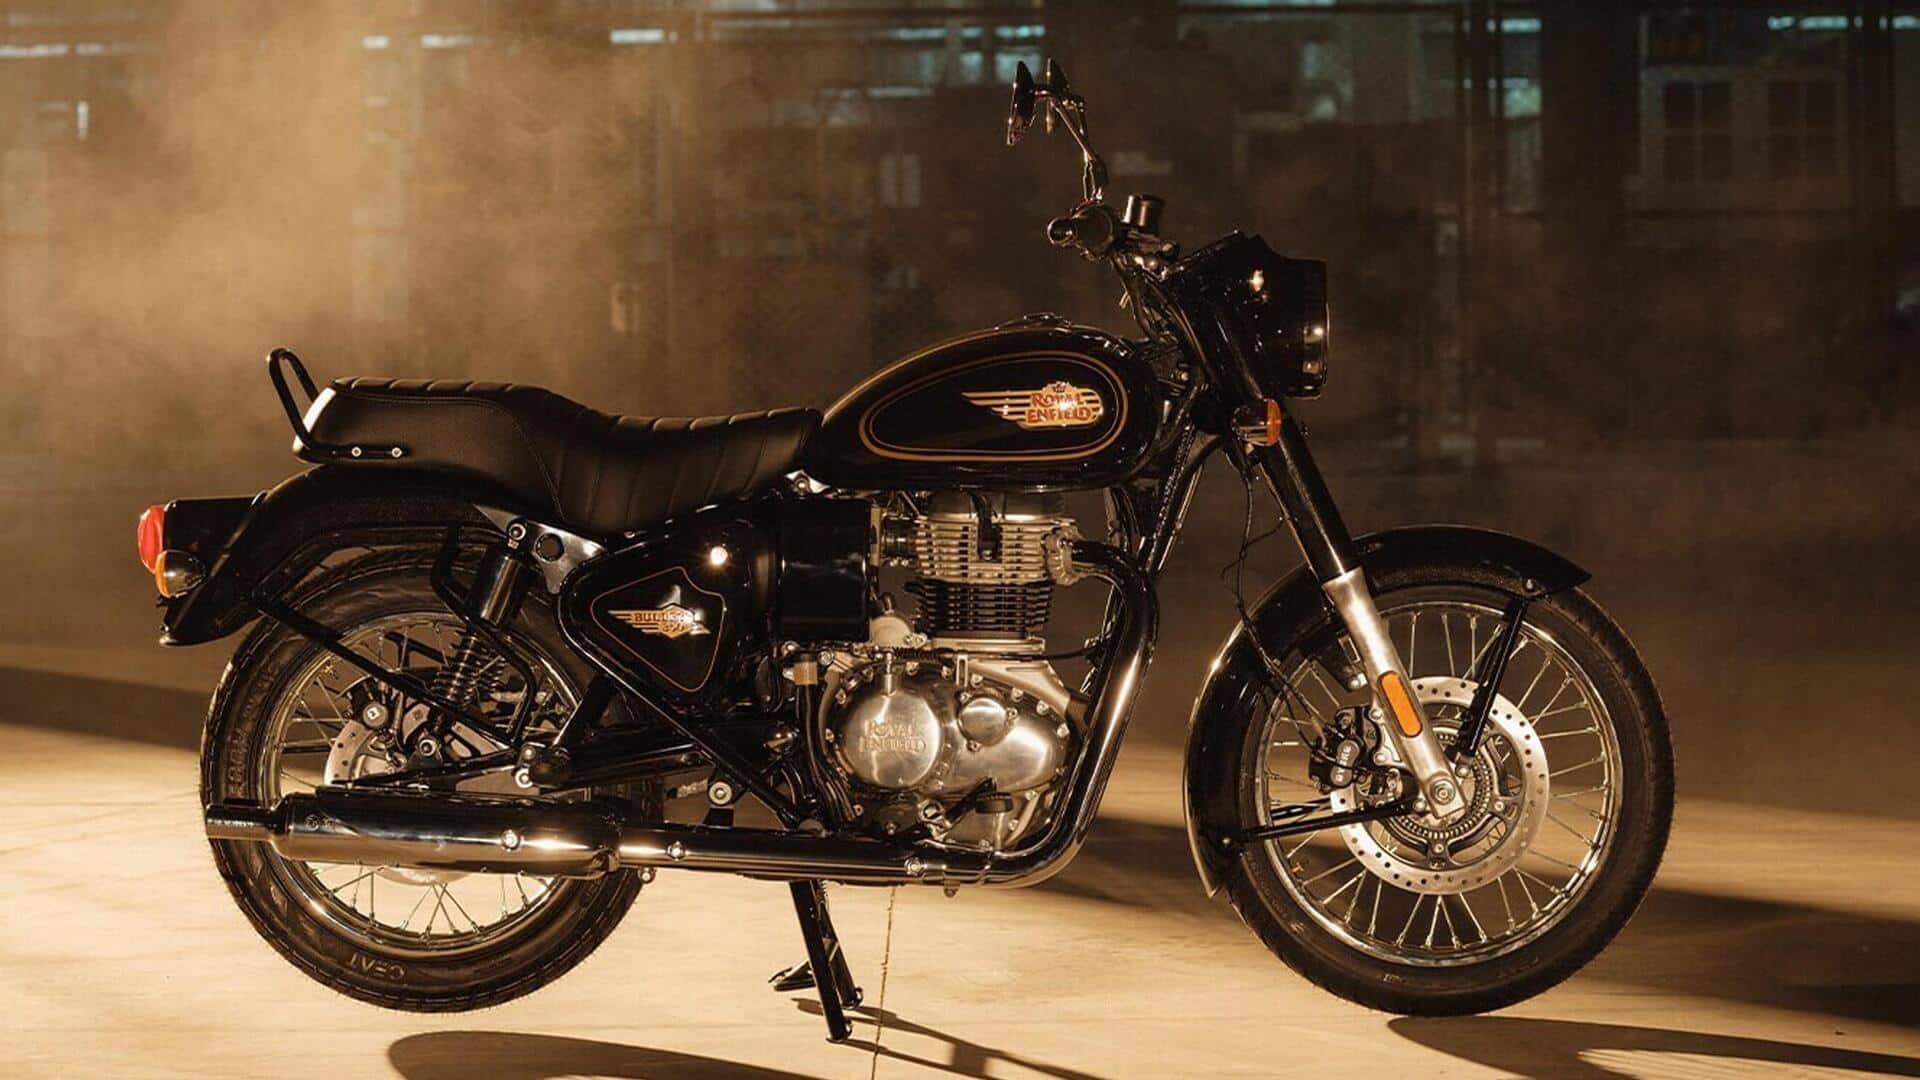 New Royal Enfield Bullet 350 launched at Rs. 1.74 lakh